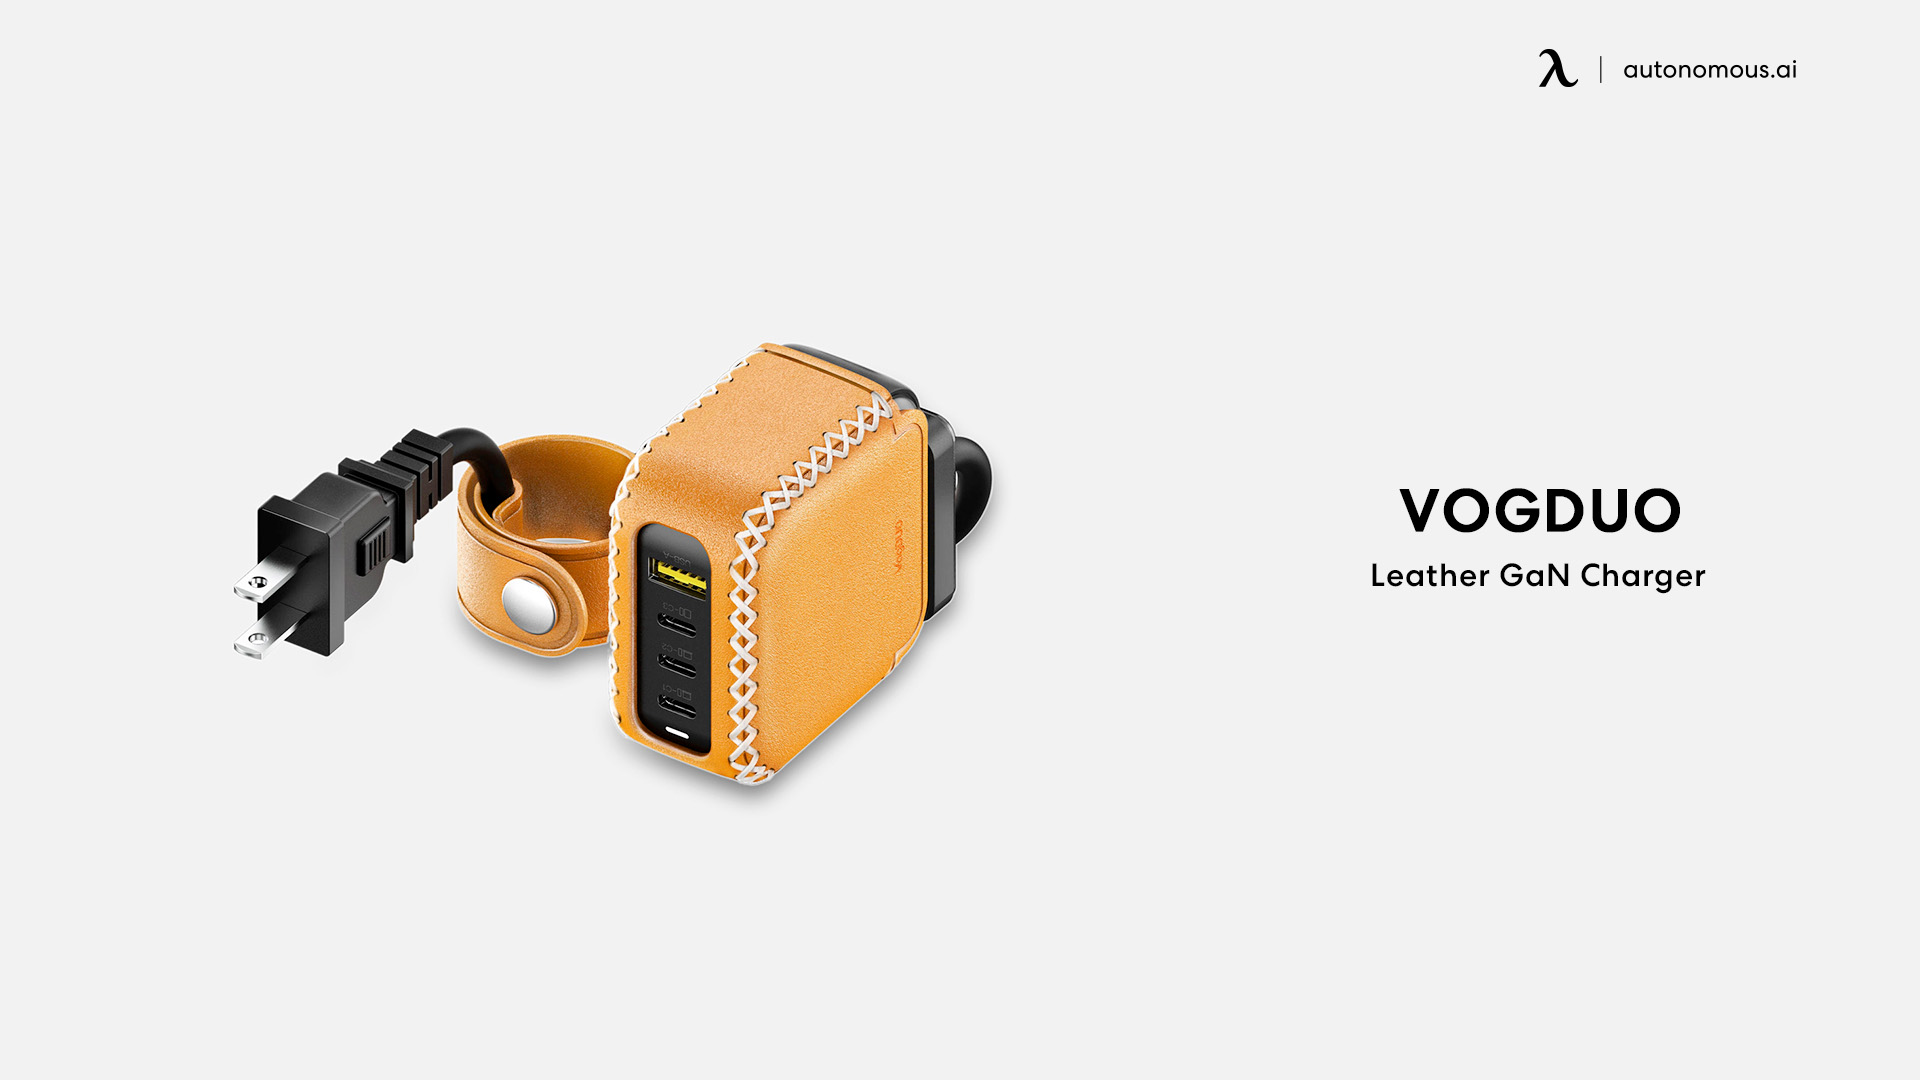 Leather GaN Charger by VogDuo in office essentials list